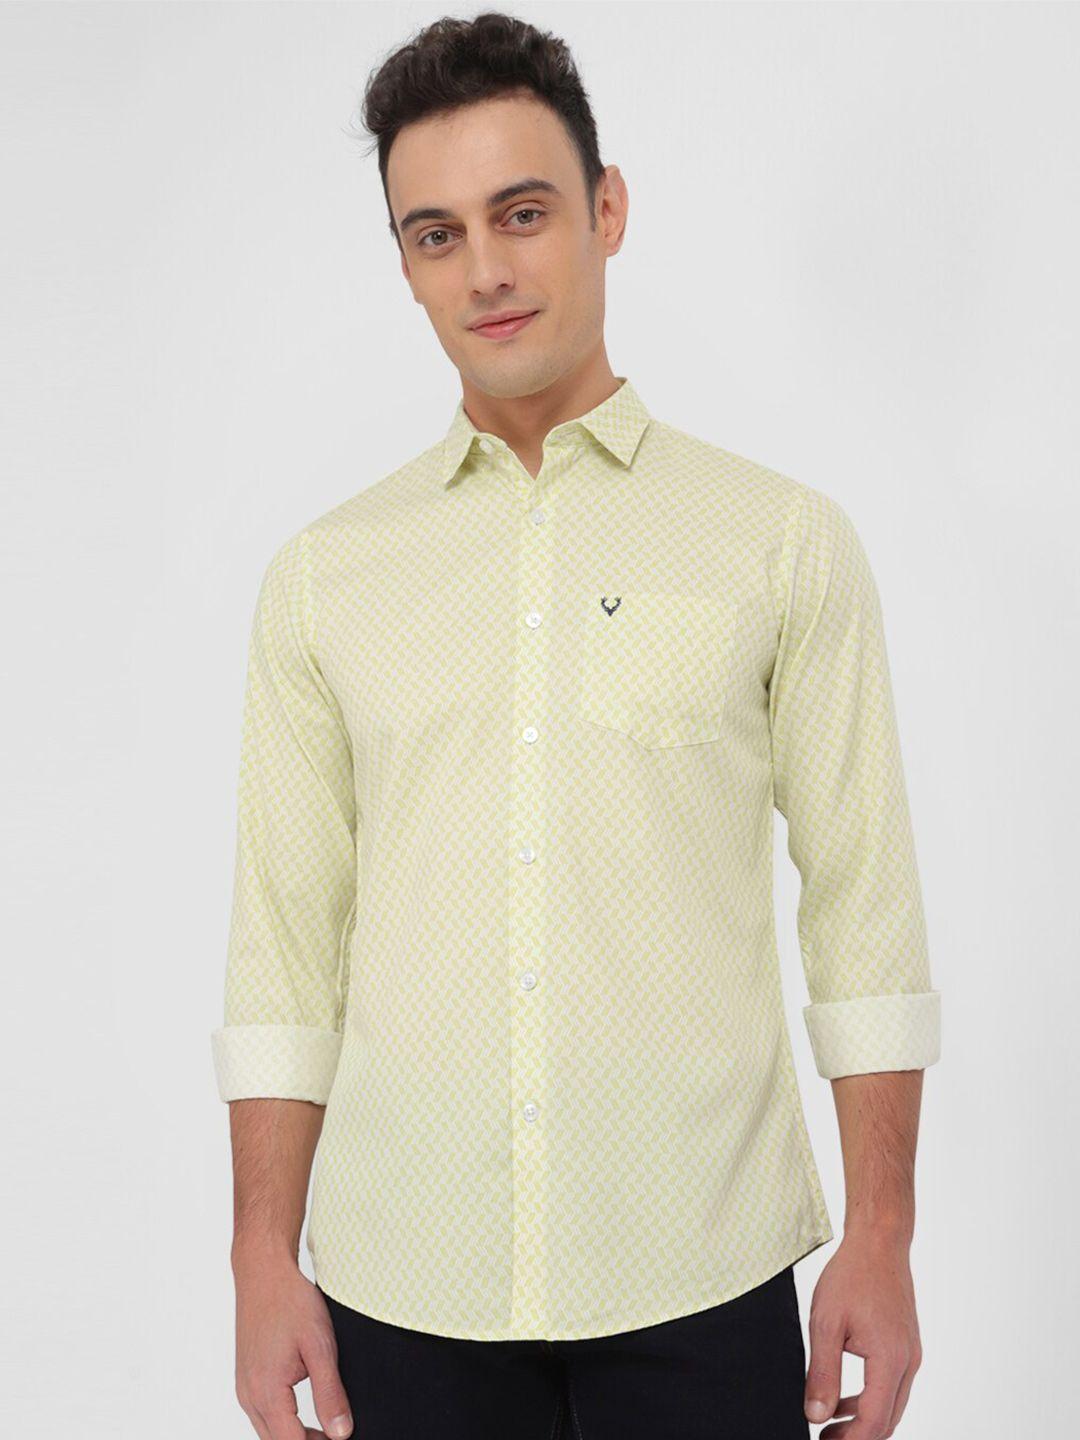 allen-solly-slim-fit-geometric-printed-pure-cotton-casual-shirt